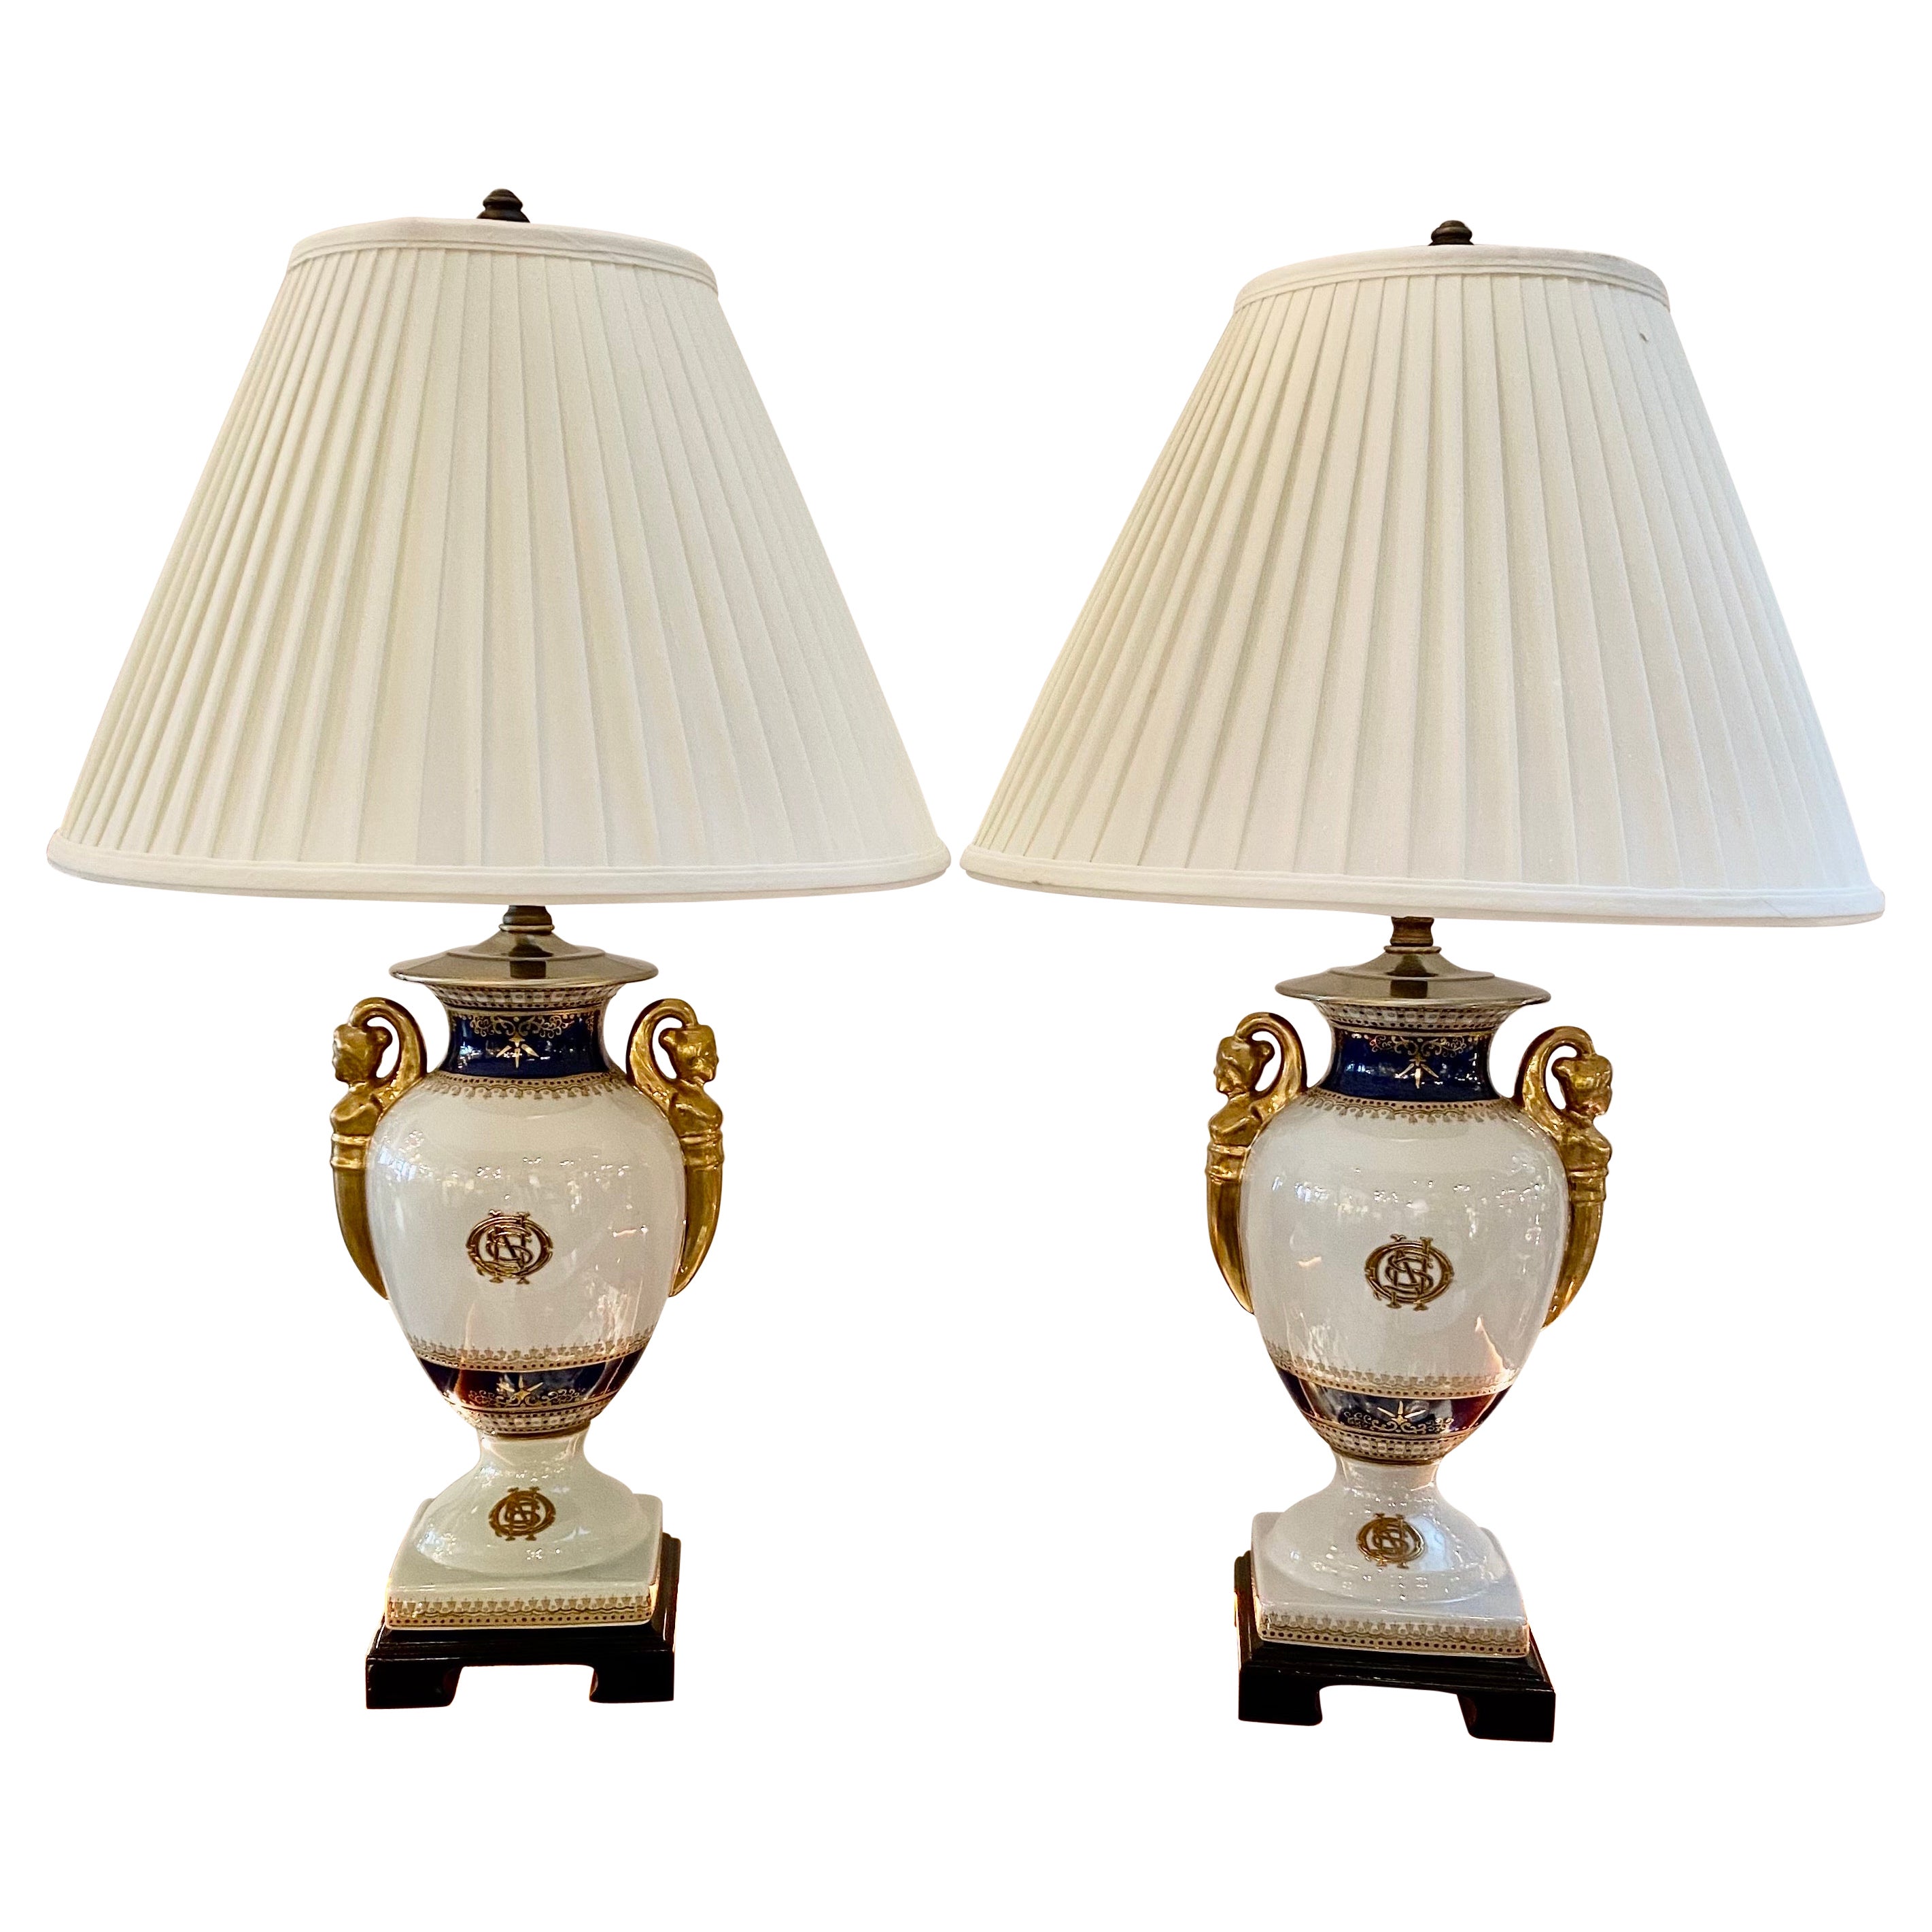 Pair of Porcelain Hand Painted Neoclassical Table Lamps